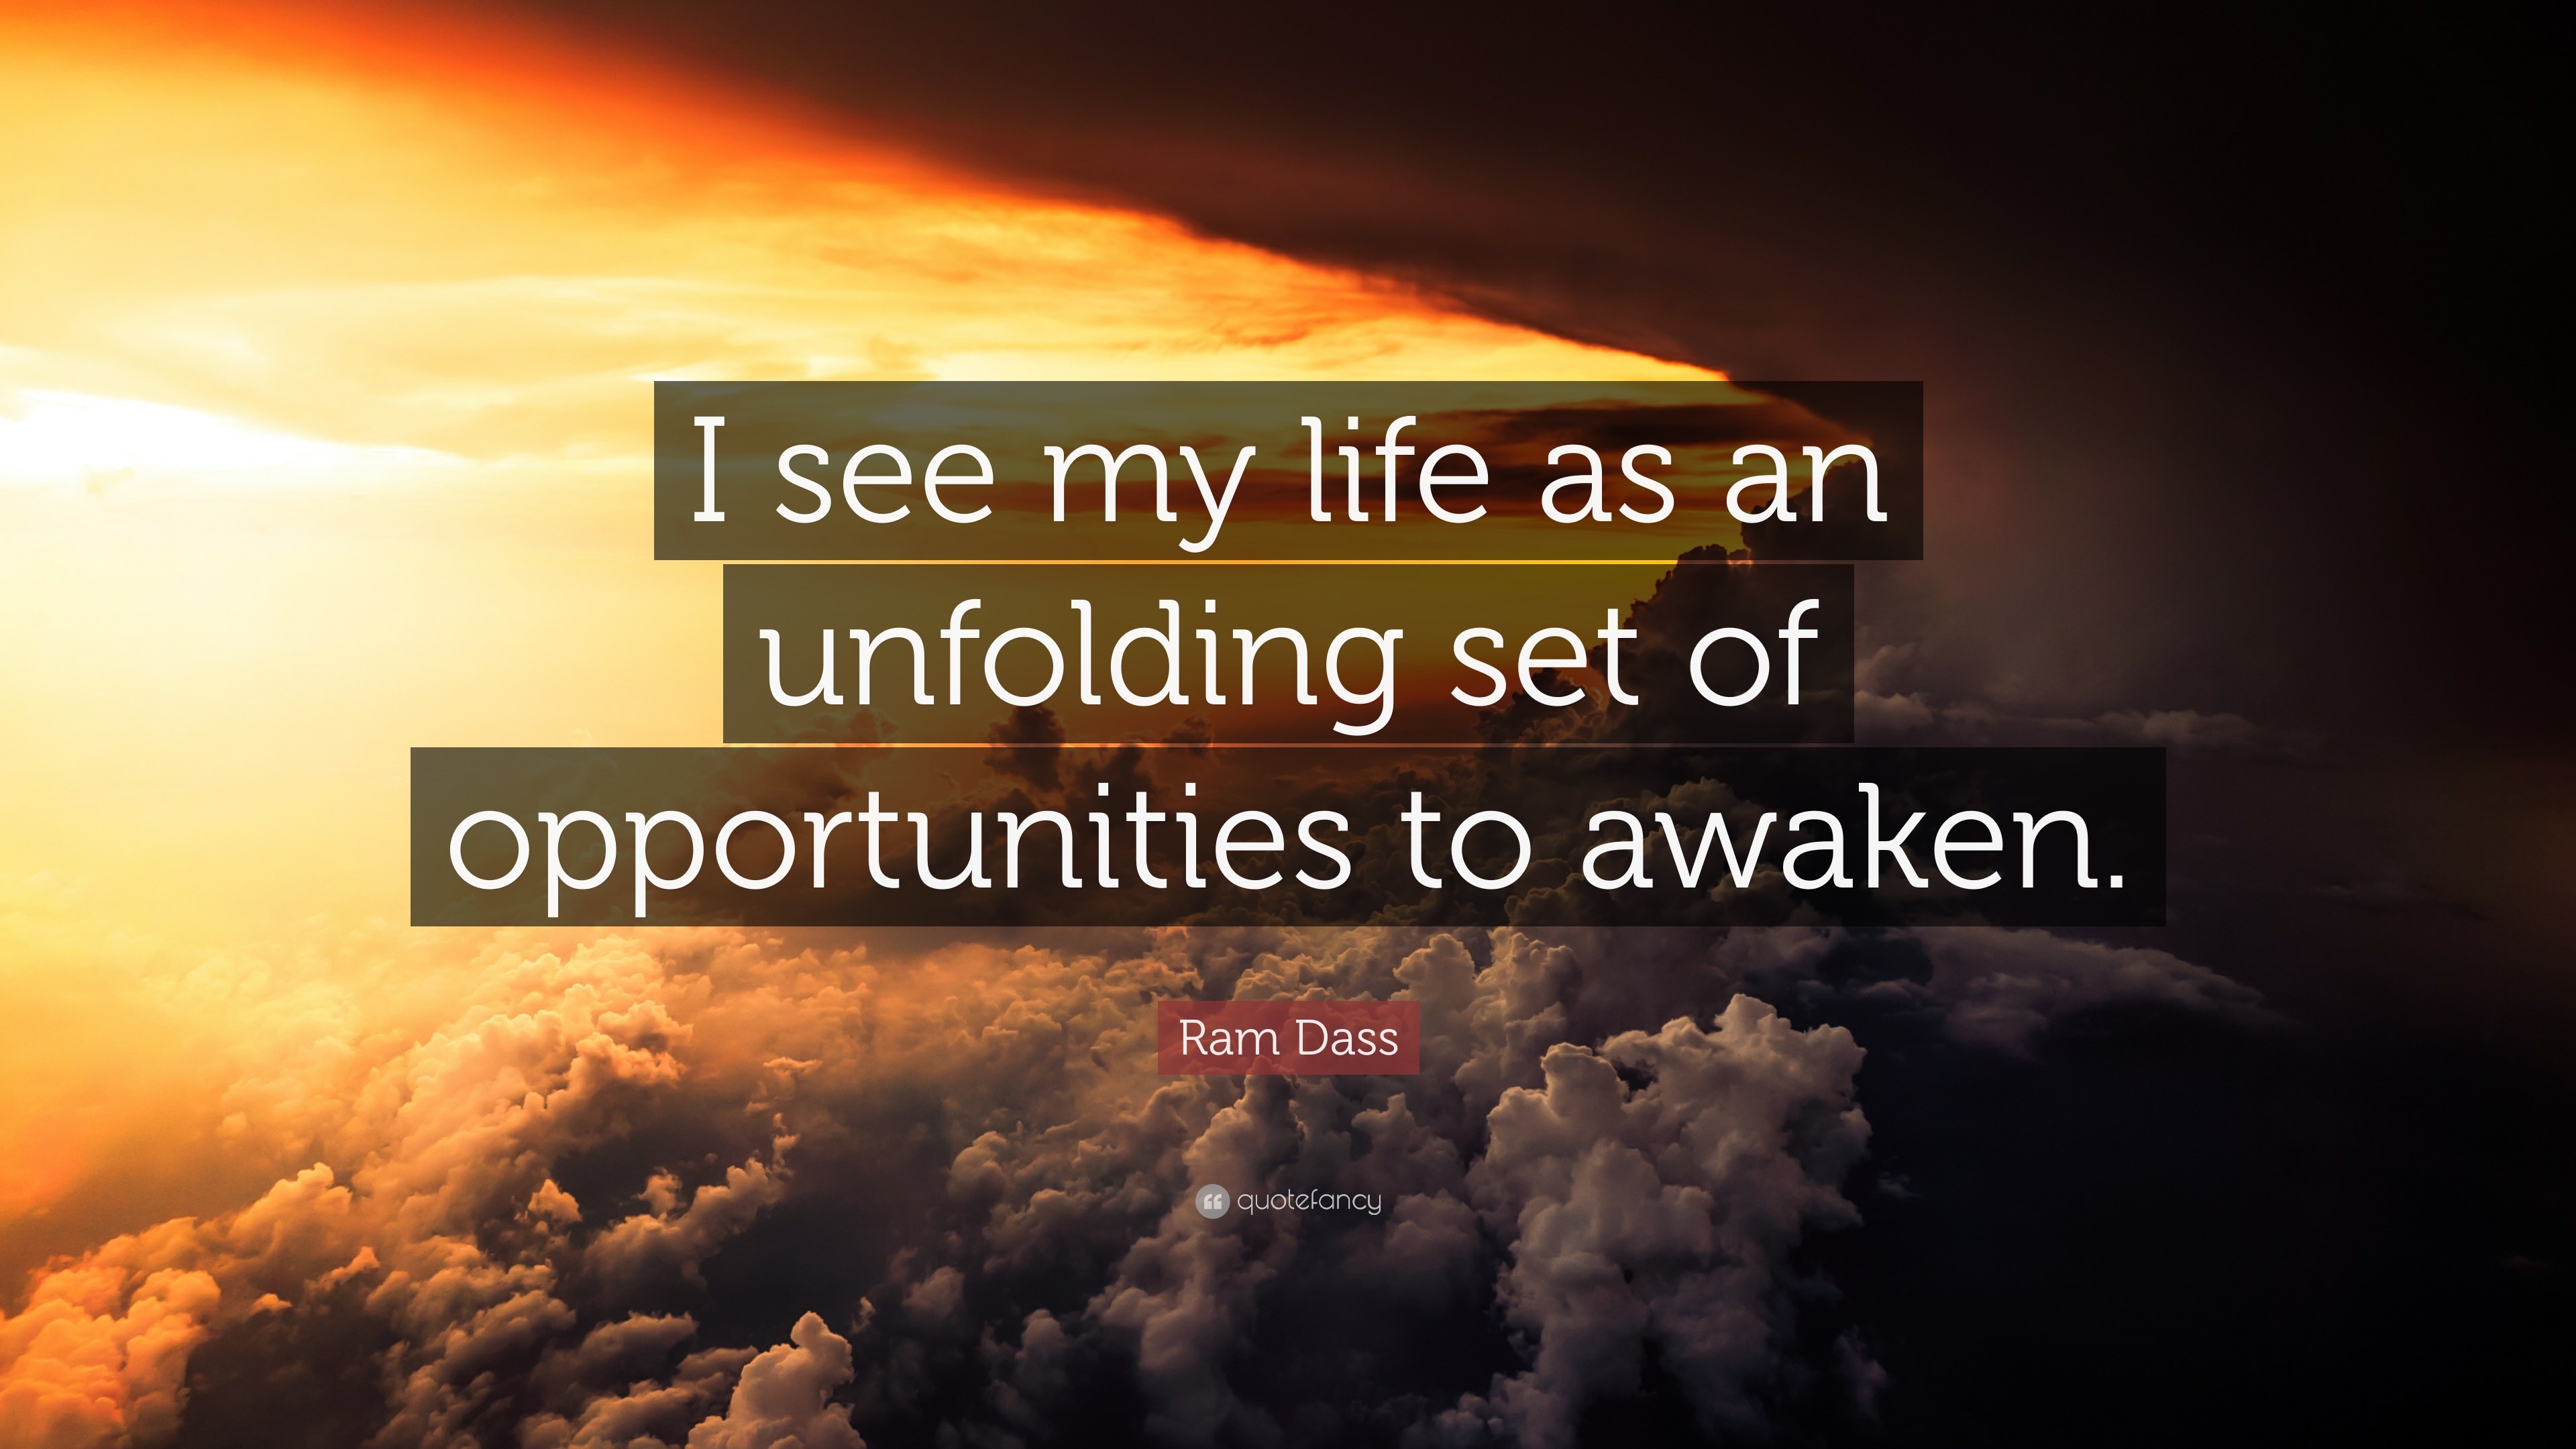 Ram Dass Quote: “I see my life as an unfolding set of opportunities to ...